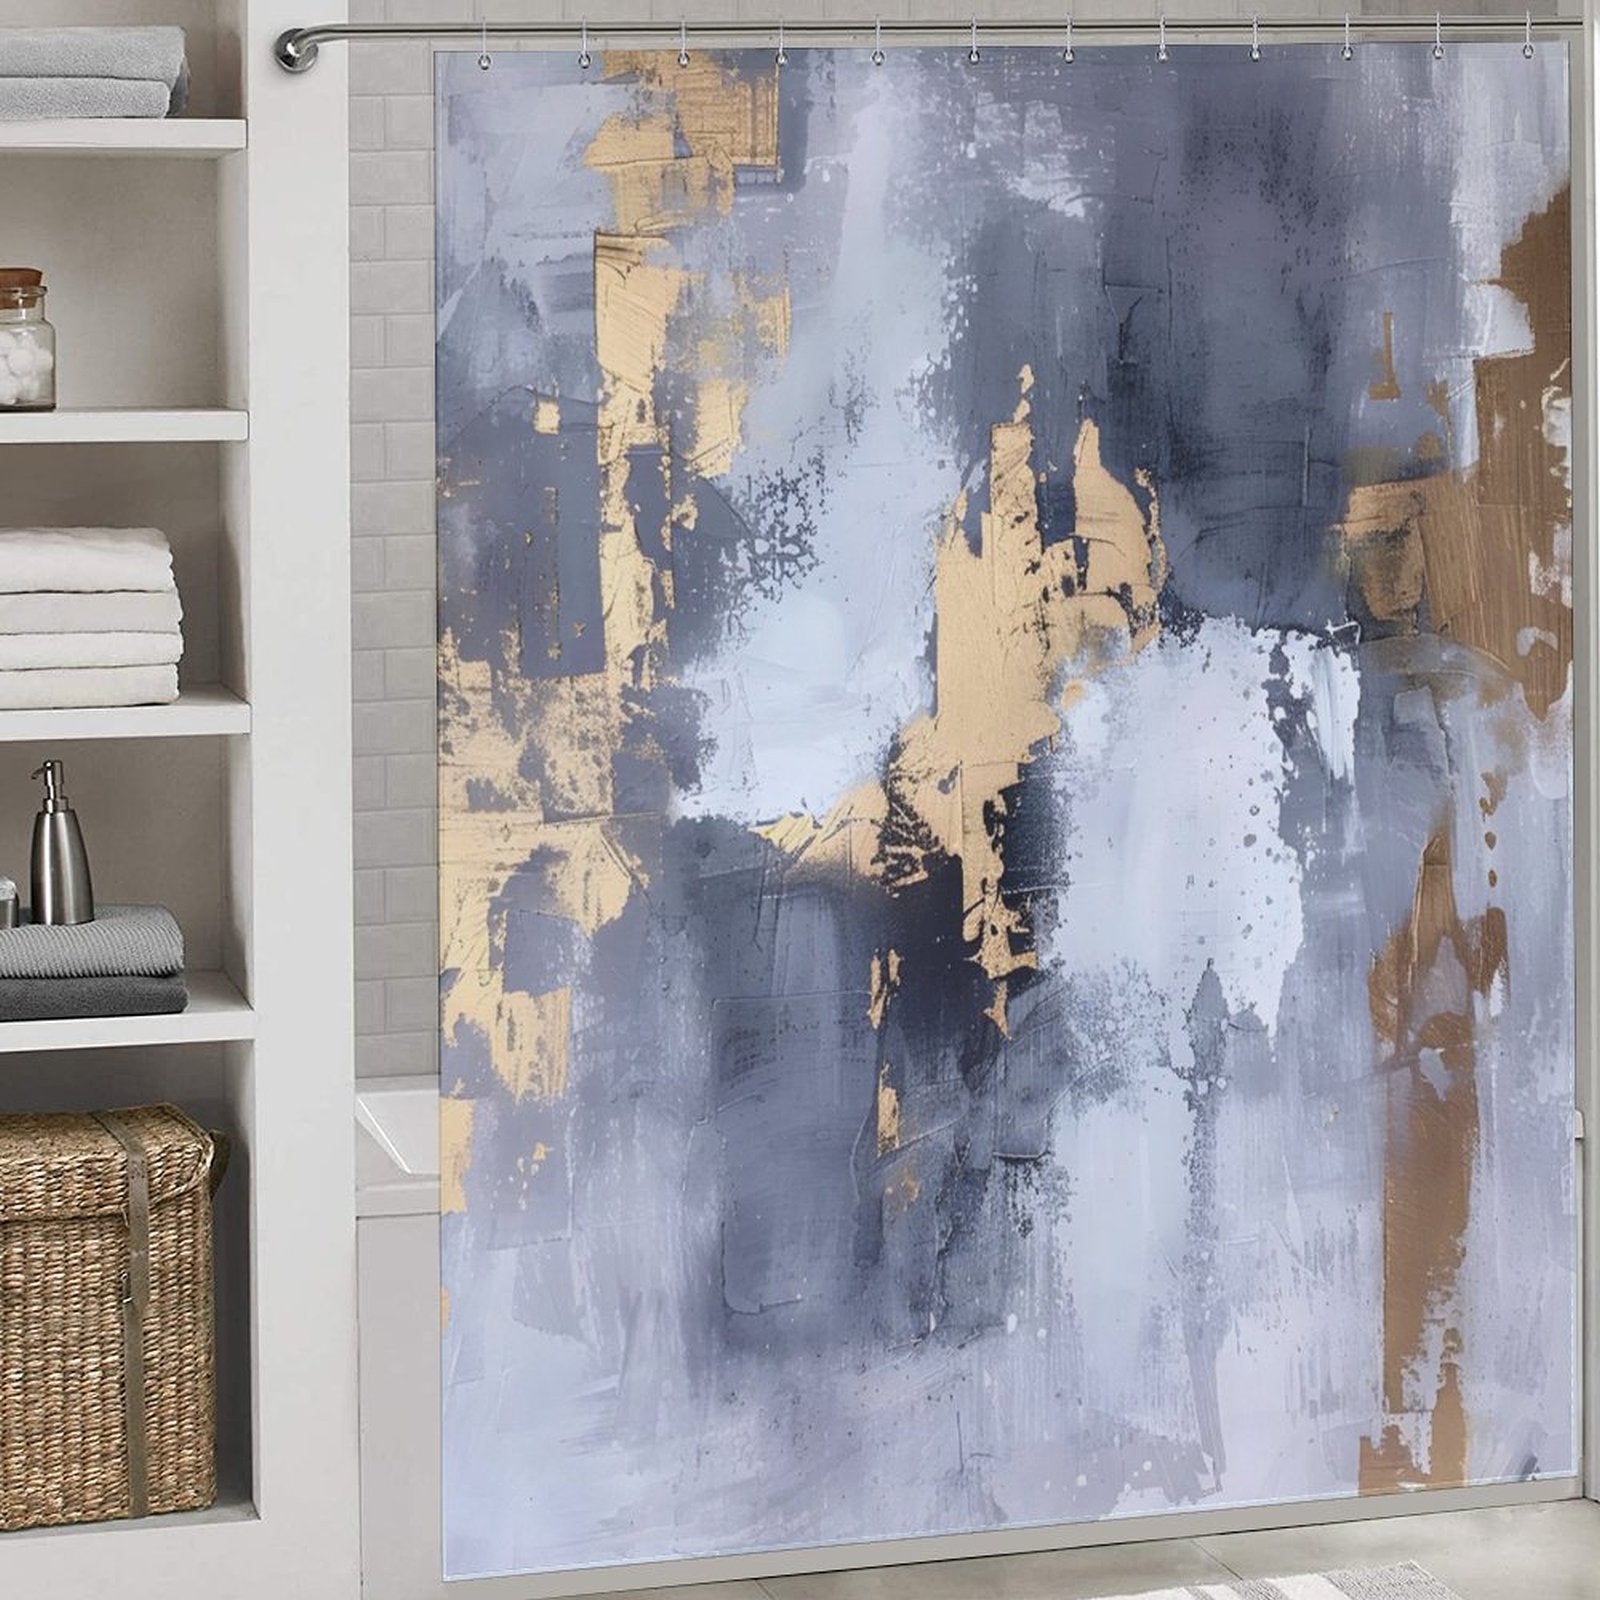 A bathroom with a Grey and Gold Watercolor Abstract Modern Art White Silver Strokes Shower Curtain-Cottoncat. The waterproof and mildew-resistant shower curtain is hung on a silver rod. Towels and woven baskets are neatly arranged on shelves nearby.